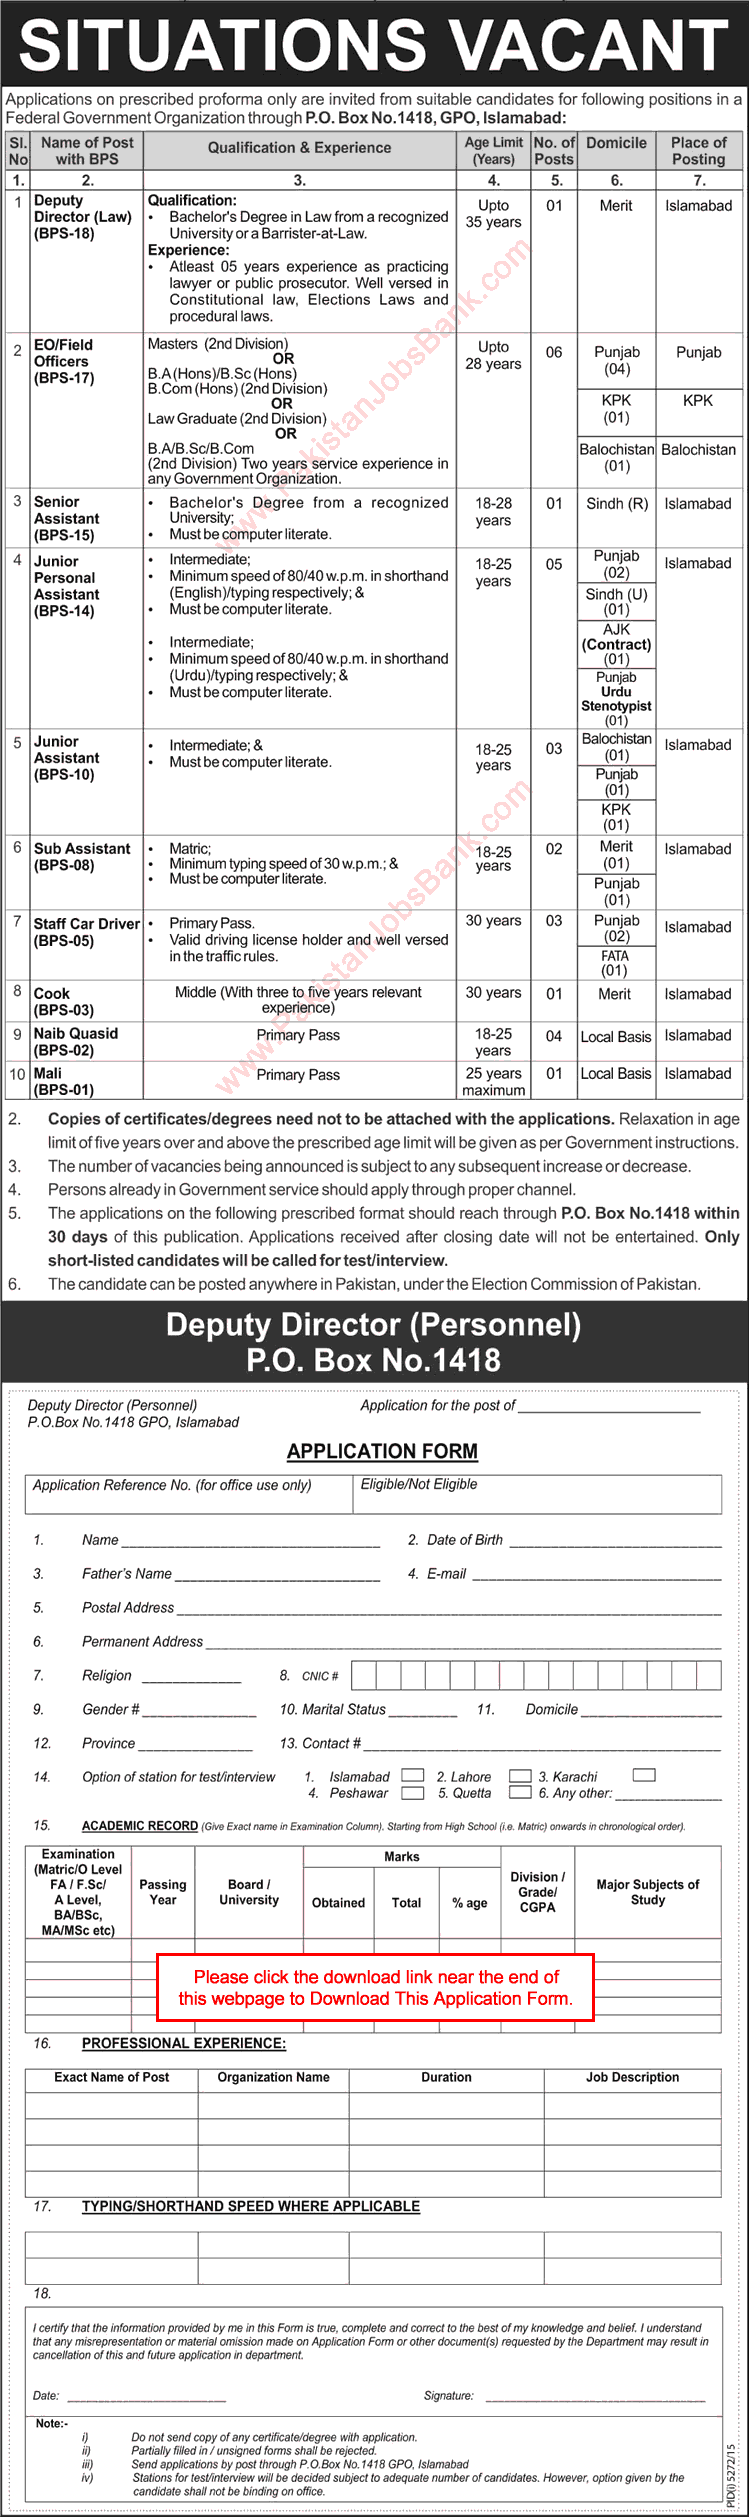 PO Box 1418 GPO Islamabad Jobs 2016 April Application Form Election Commission of Pakistan (ECP) Latest